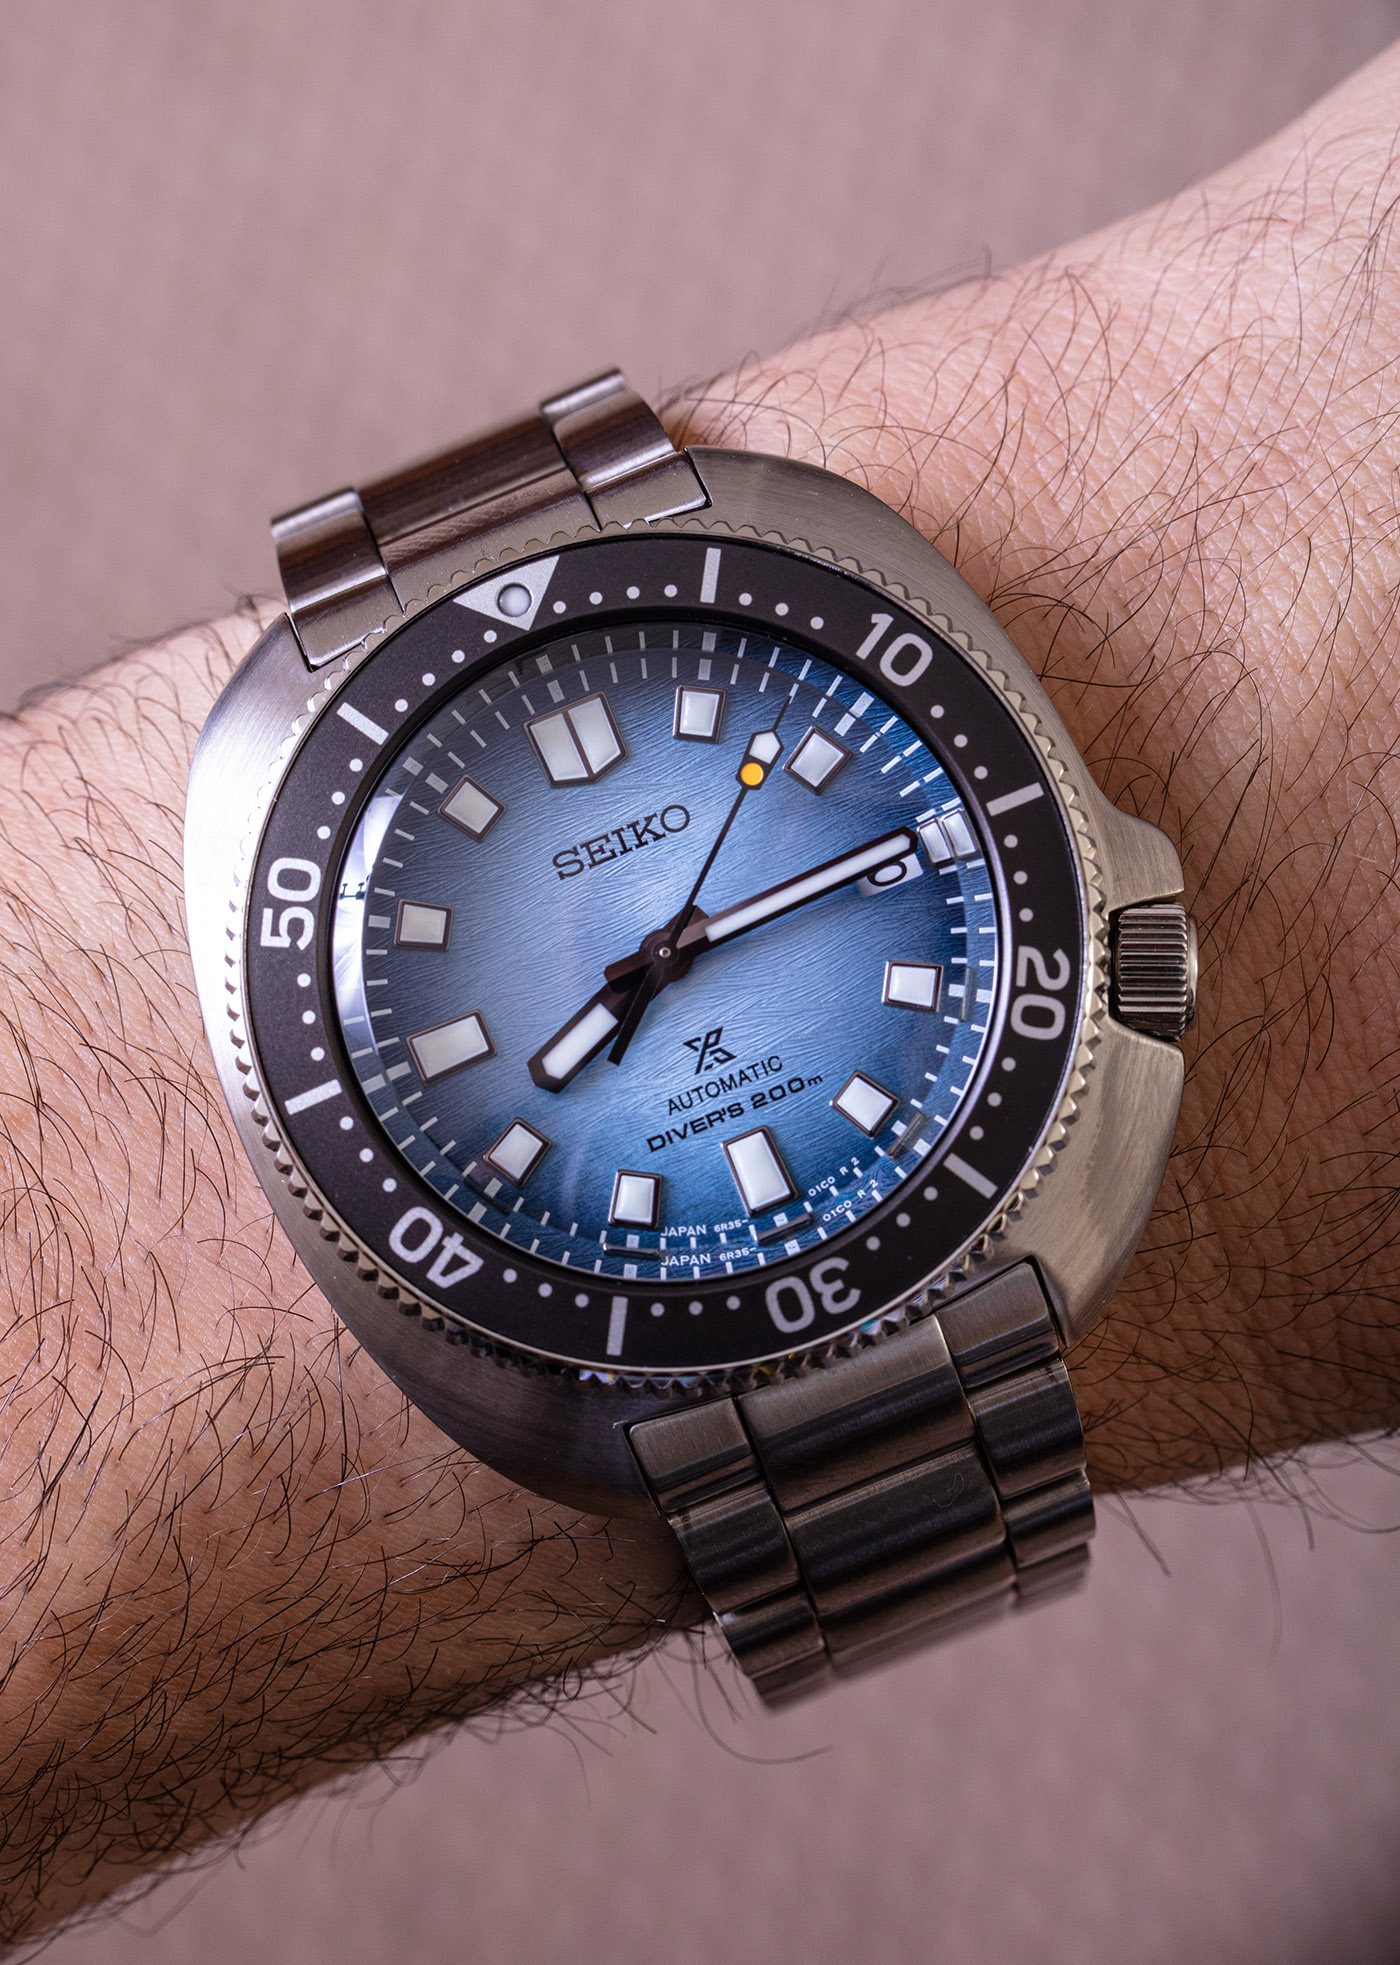 Watch Review: Seiko Prospex Built For The Ice Divers . Special Edition  SPB261, SPB263, And SPB265 | aBlogtoWatch